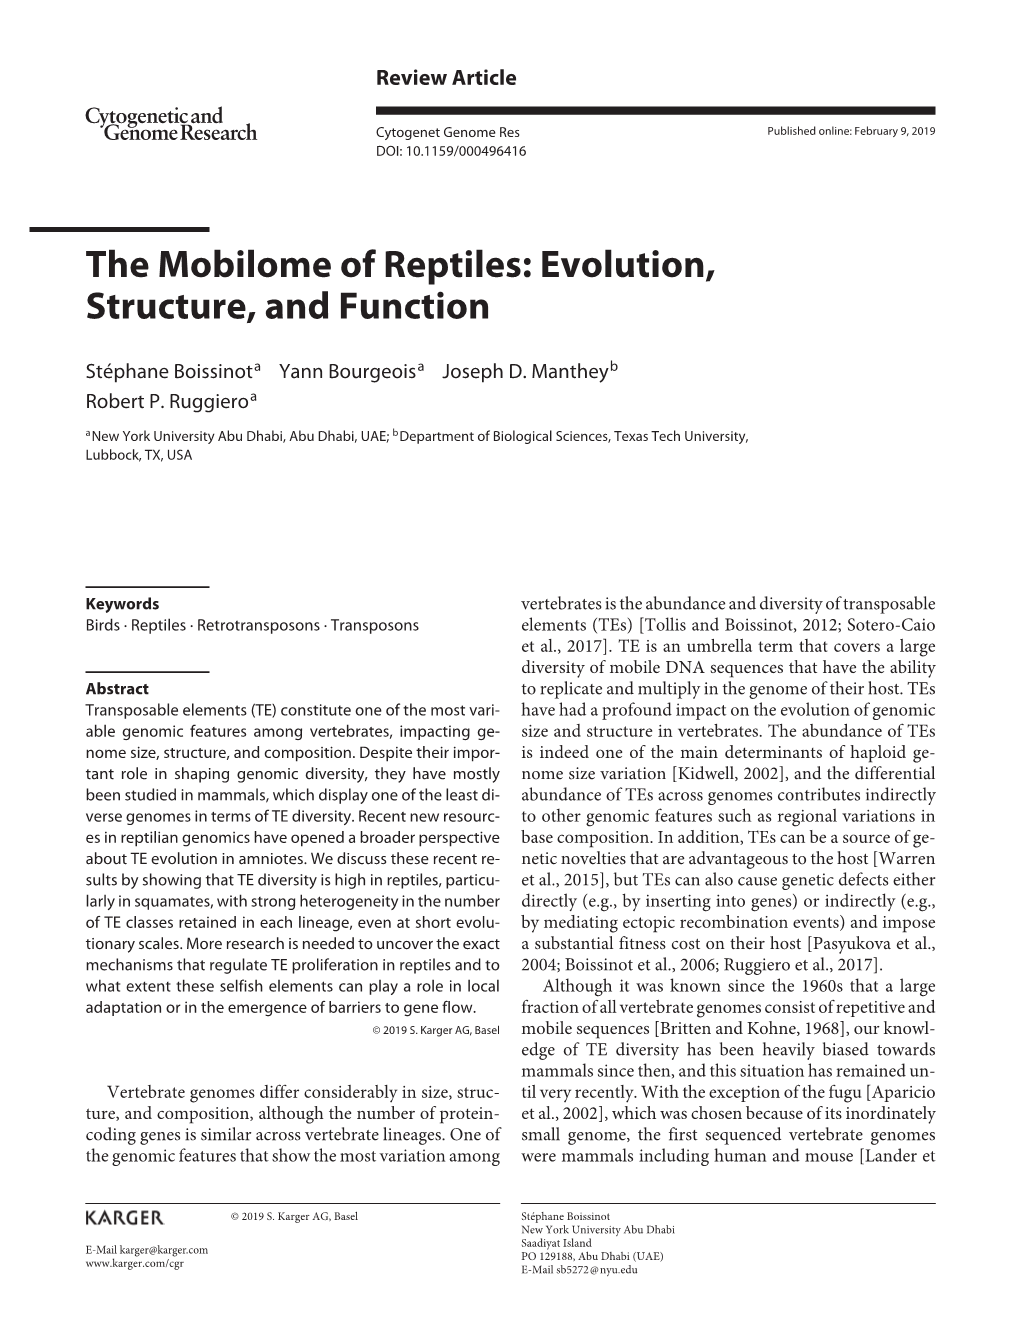 Our Paper Titled “The Mobilome of Reptiles: Evolution, Structure, And